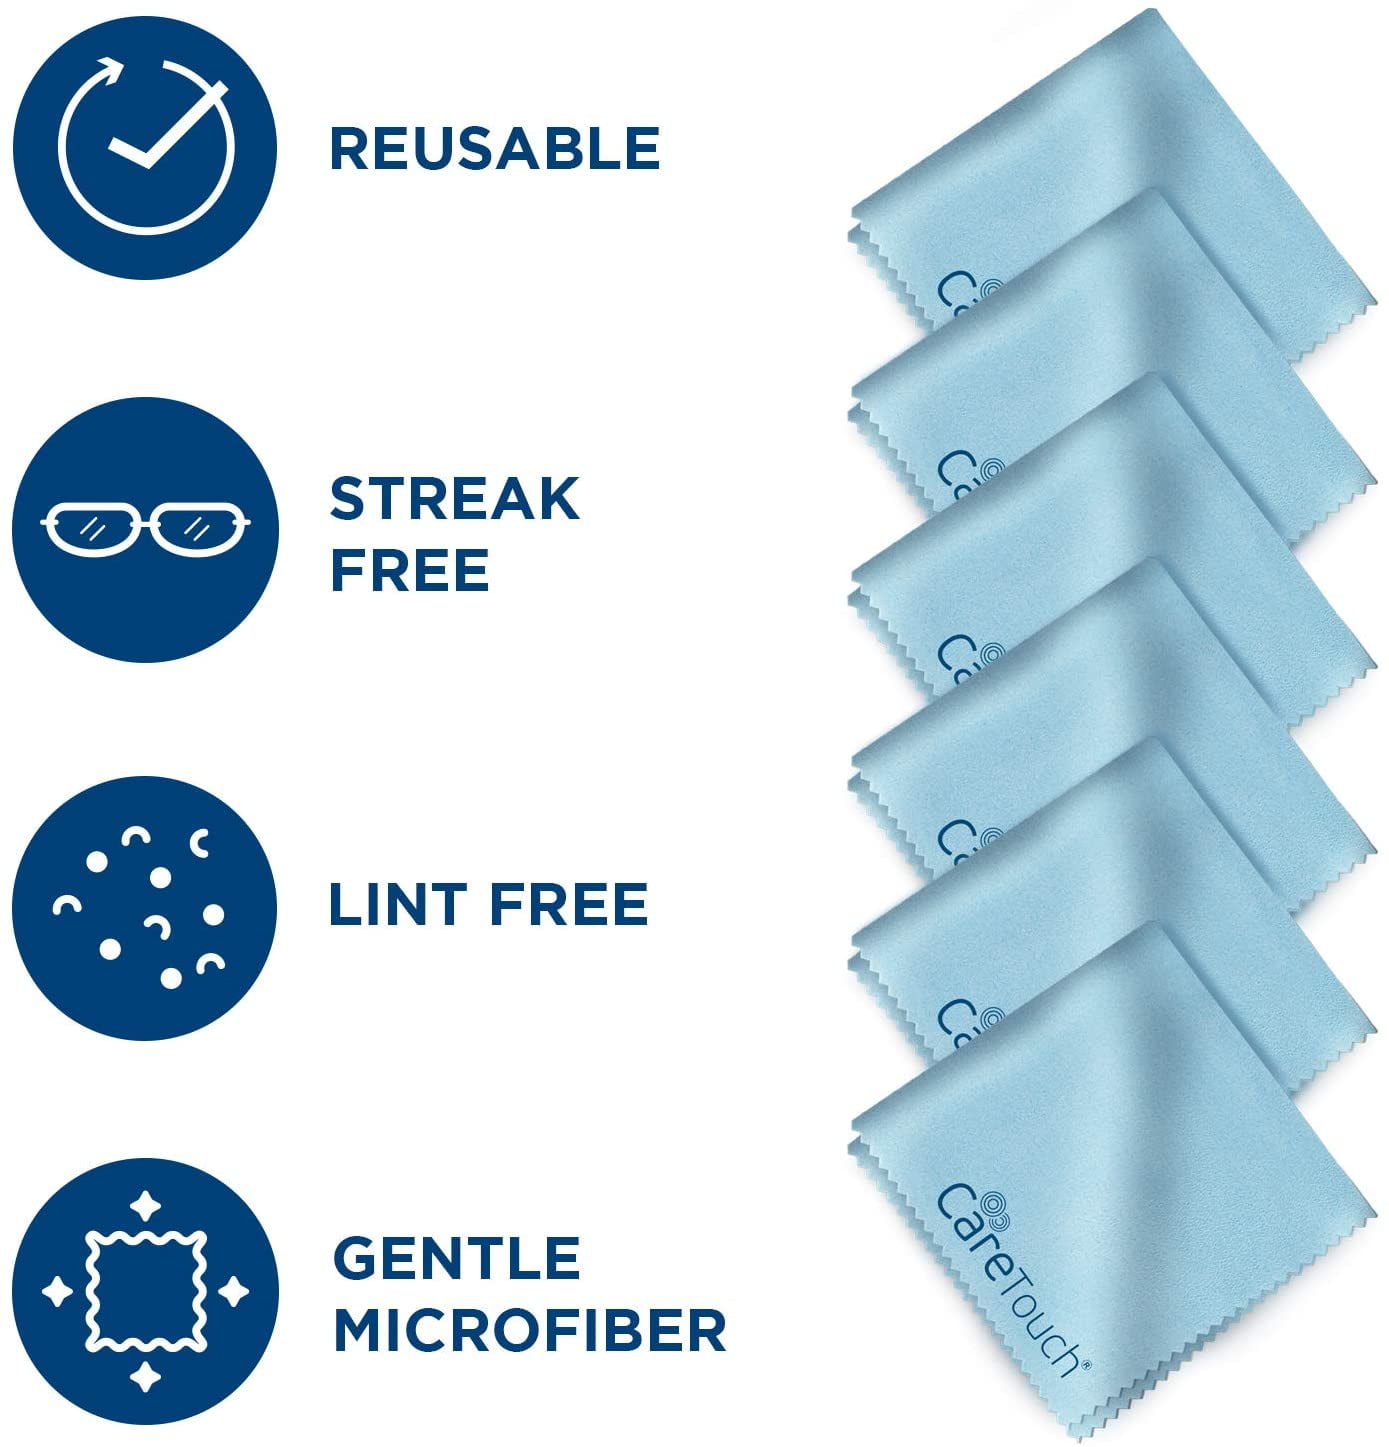 Lens Wipes with Microfiber Cloths - 400 Lens Cleaning Wipes and 10  Microfiber Cloths - Excellent for Eyeglasses and Camera Lenses